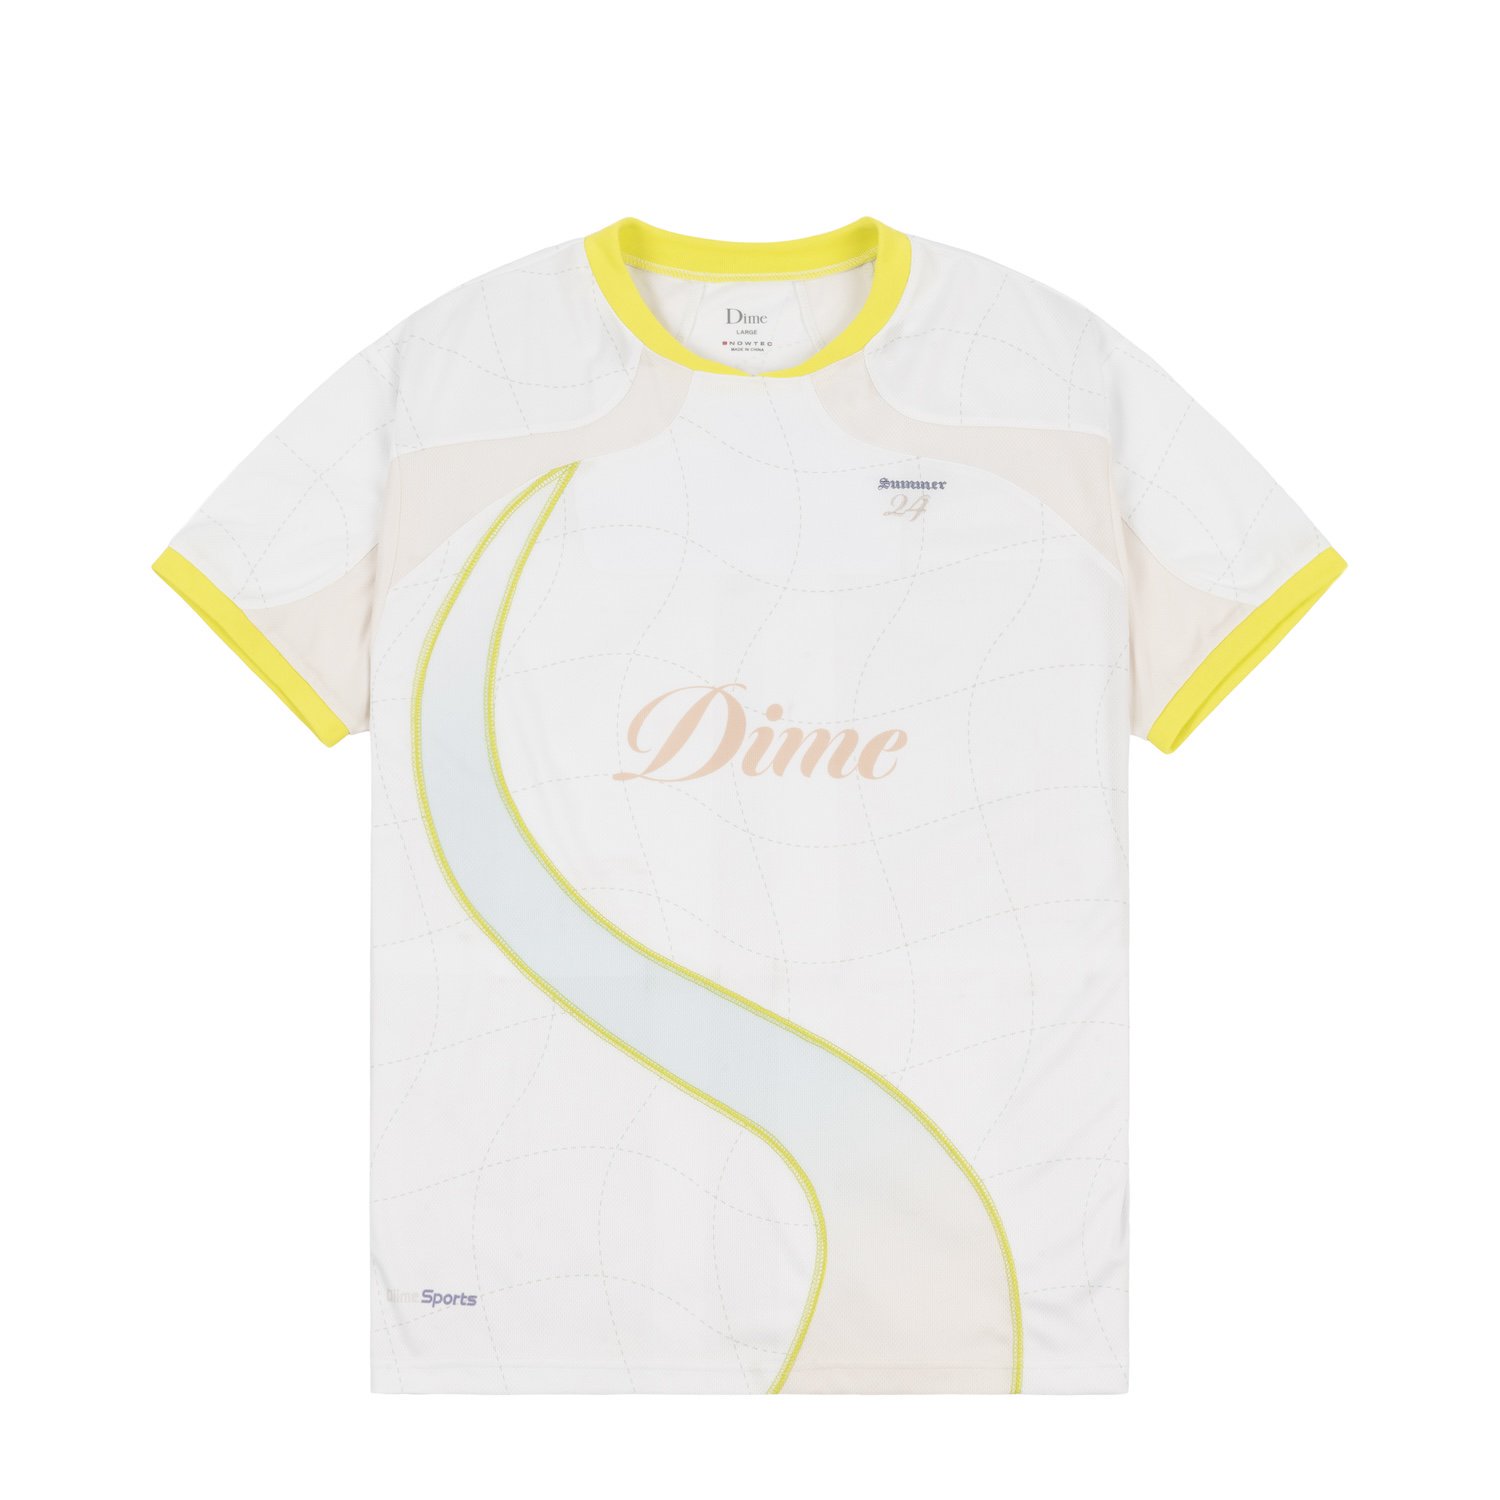 DIME<br>Pitch SS Jersey<br>